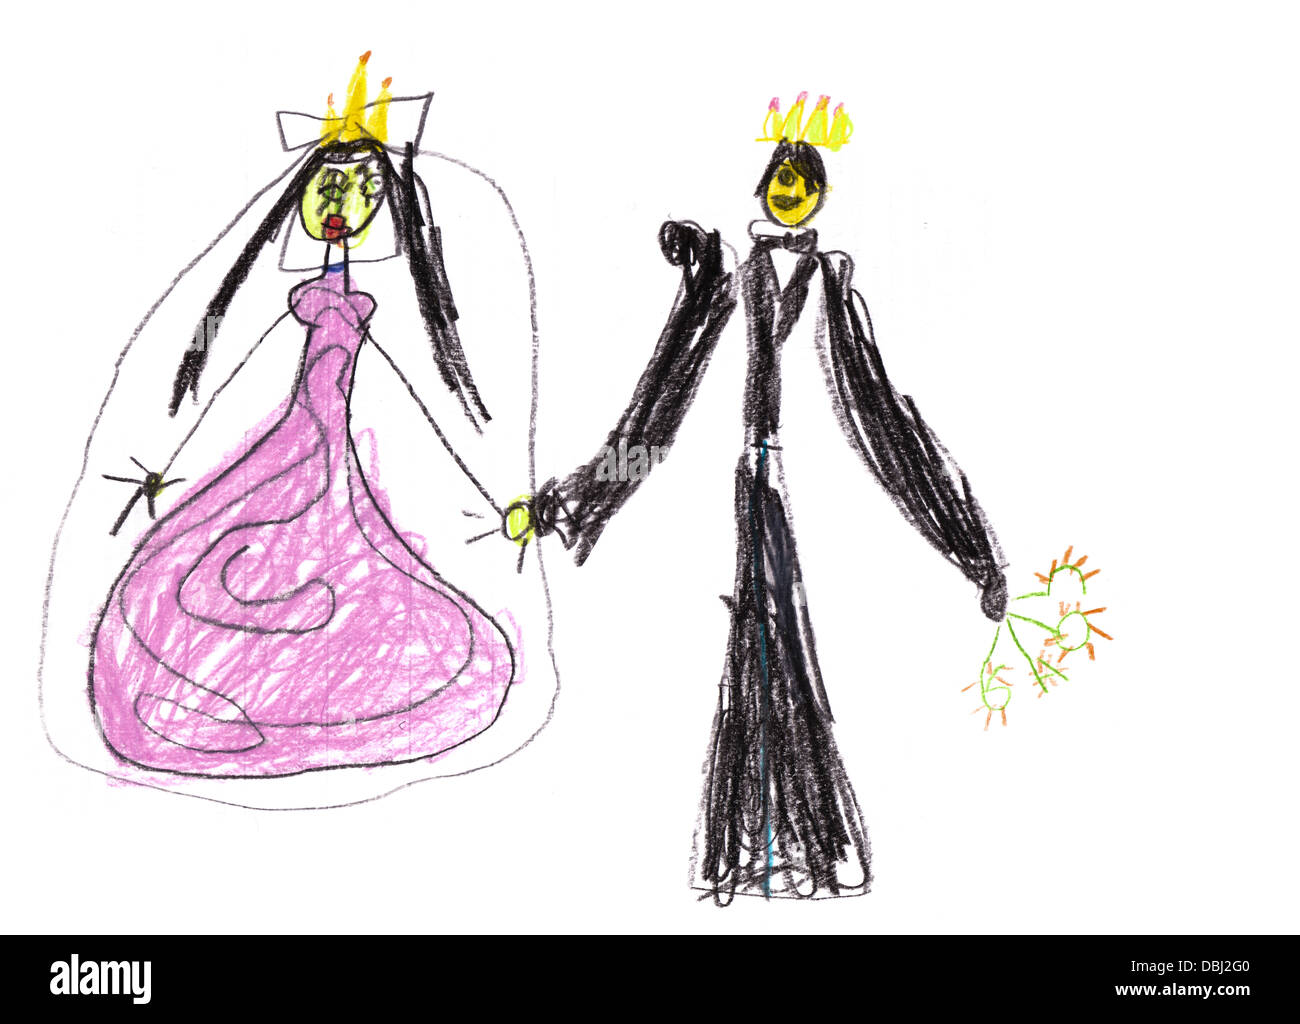 childs drawing - prince with princess holding hands Stock Photo